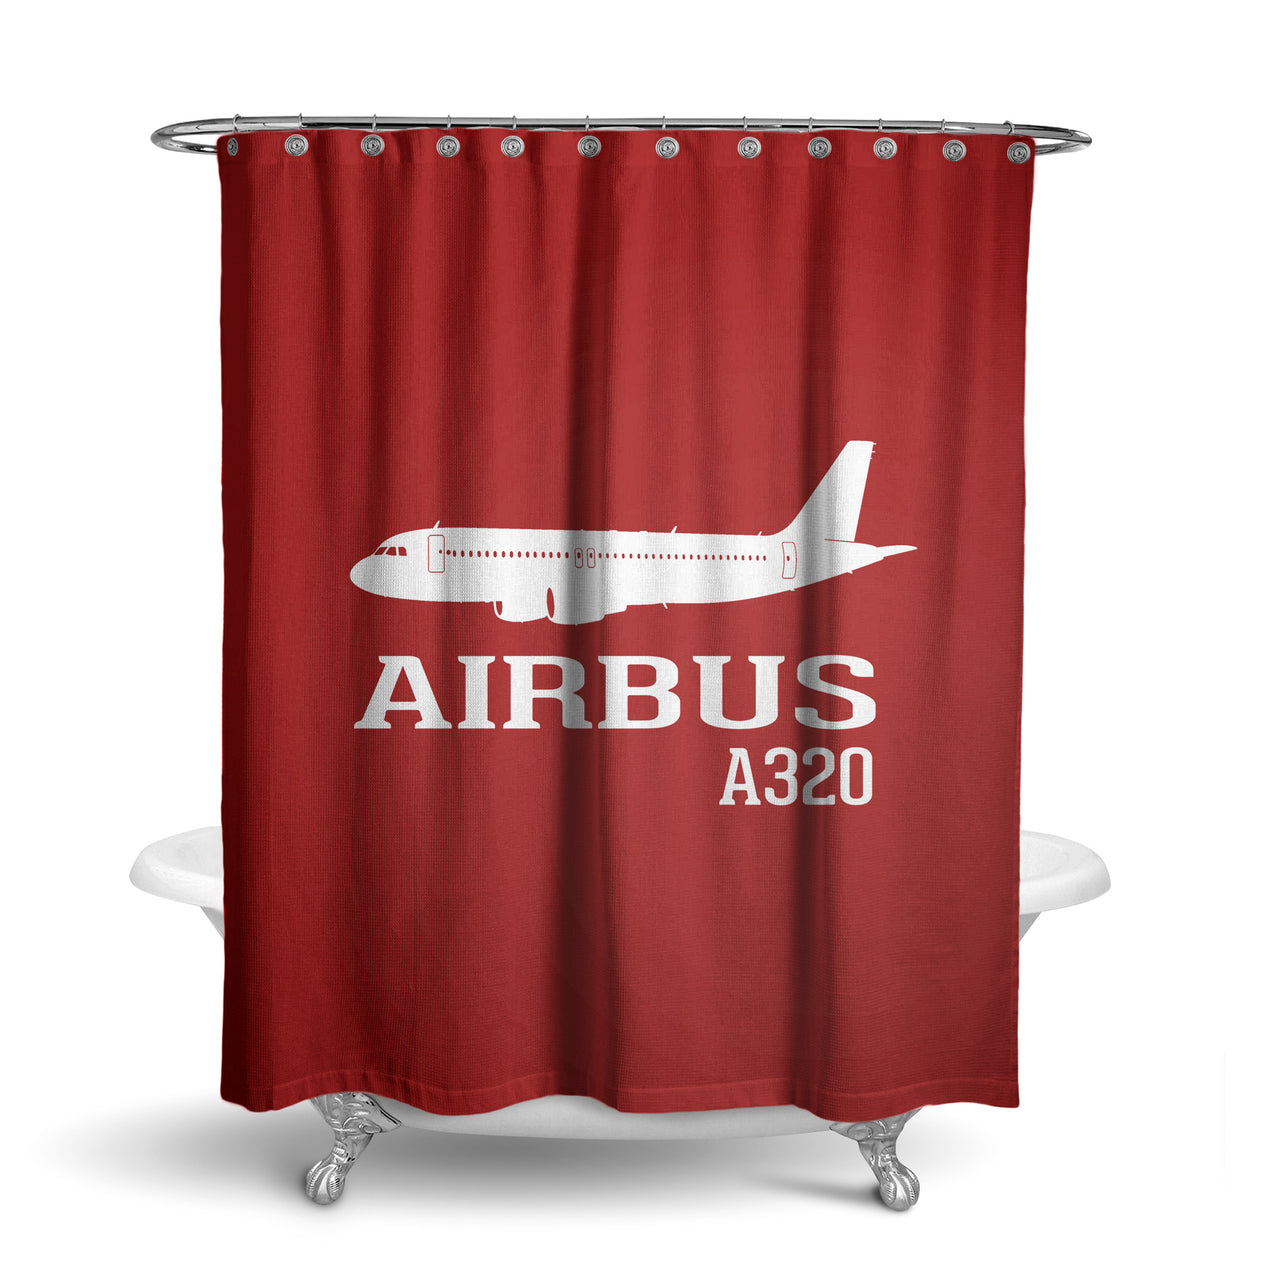 Airbus A320 Printed Designed Shower Curtains